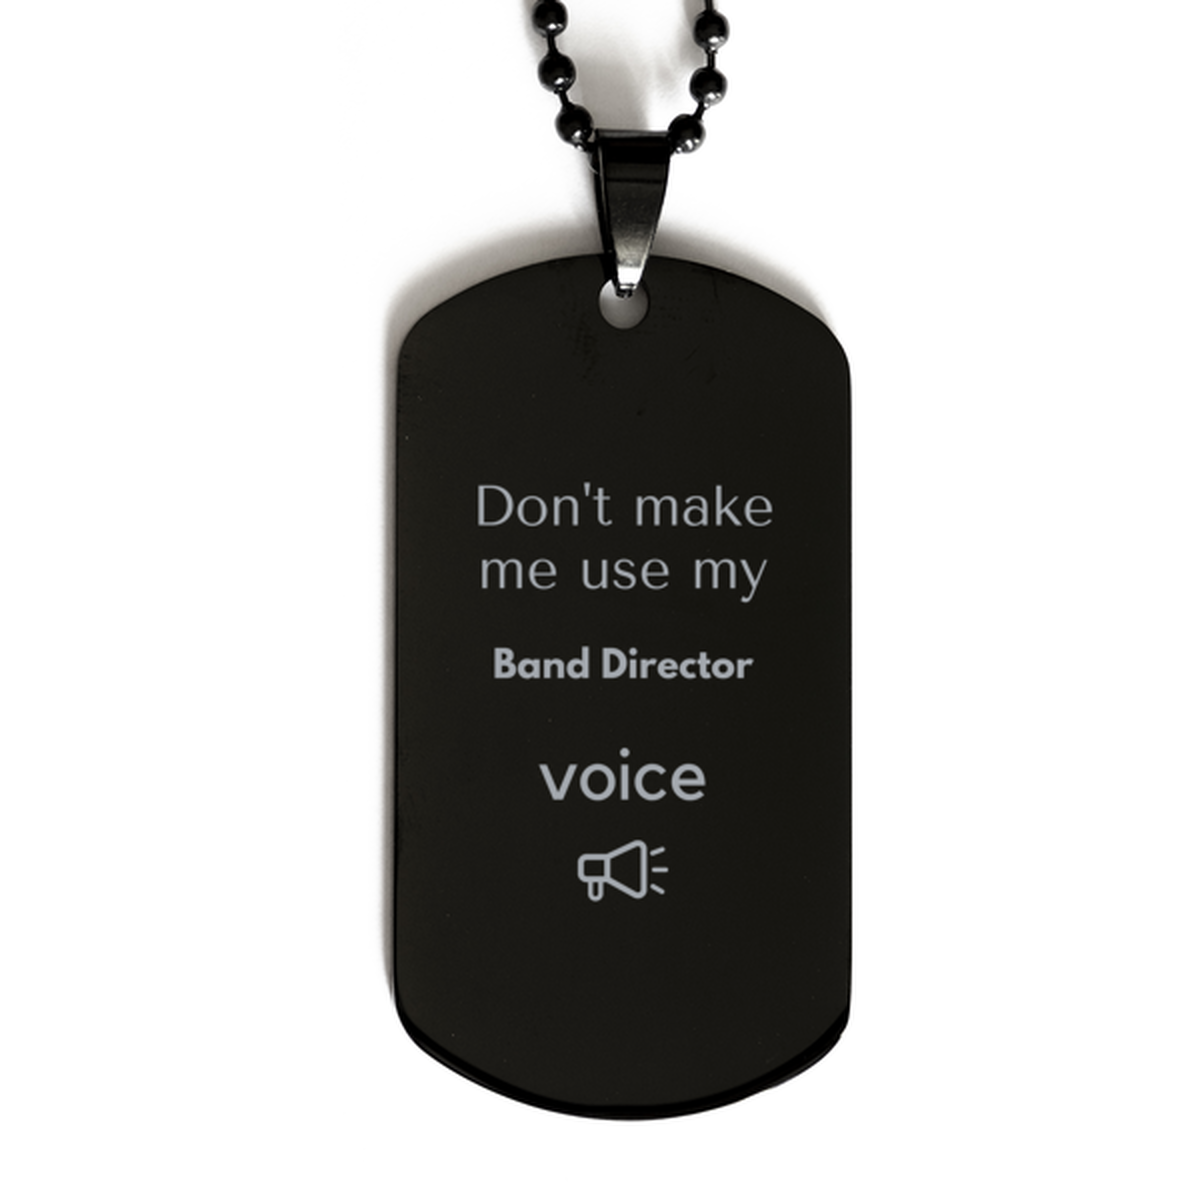 Don't make me use my Band Director voice, Sarcasm Band Director Gifts, Christmas Band Director Black Dog Tag Birthday Unique Gifts For Band Director Coworkers, Men, Women, Colleague, Friends